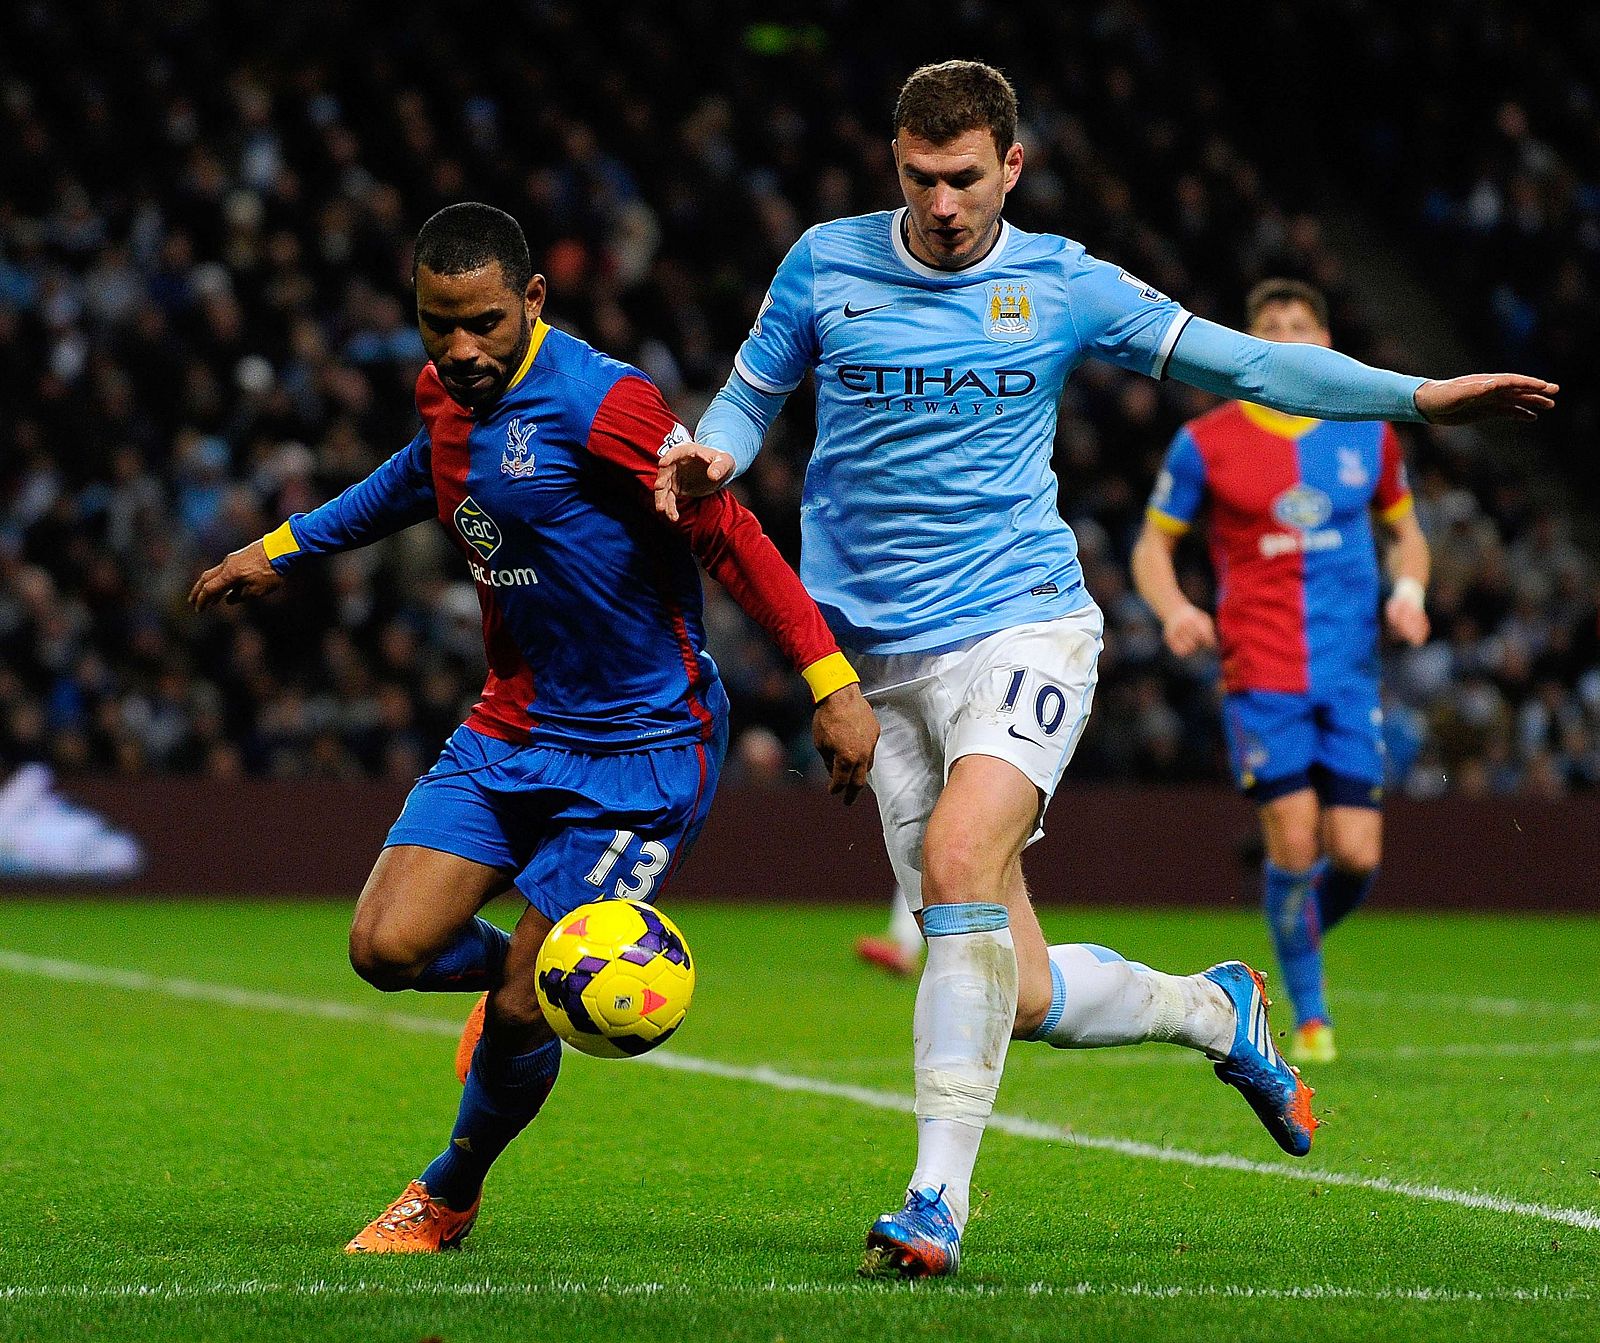 MANCHESTER CITY - CRYSTAL PALACE